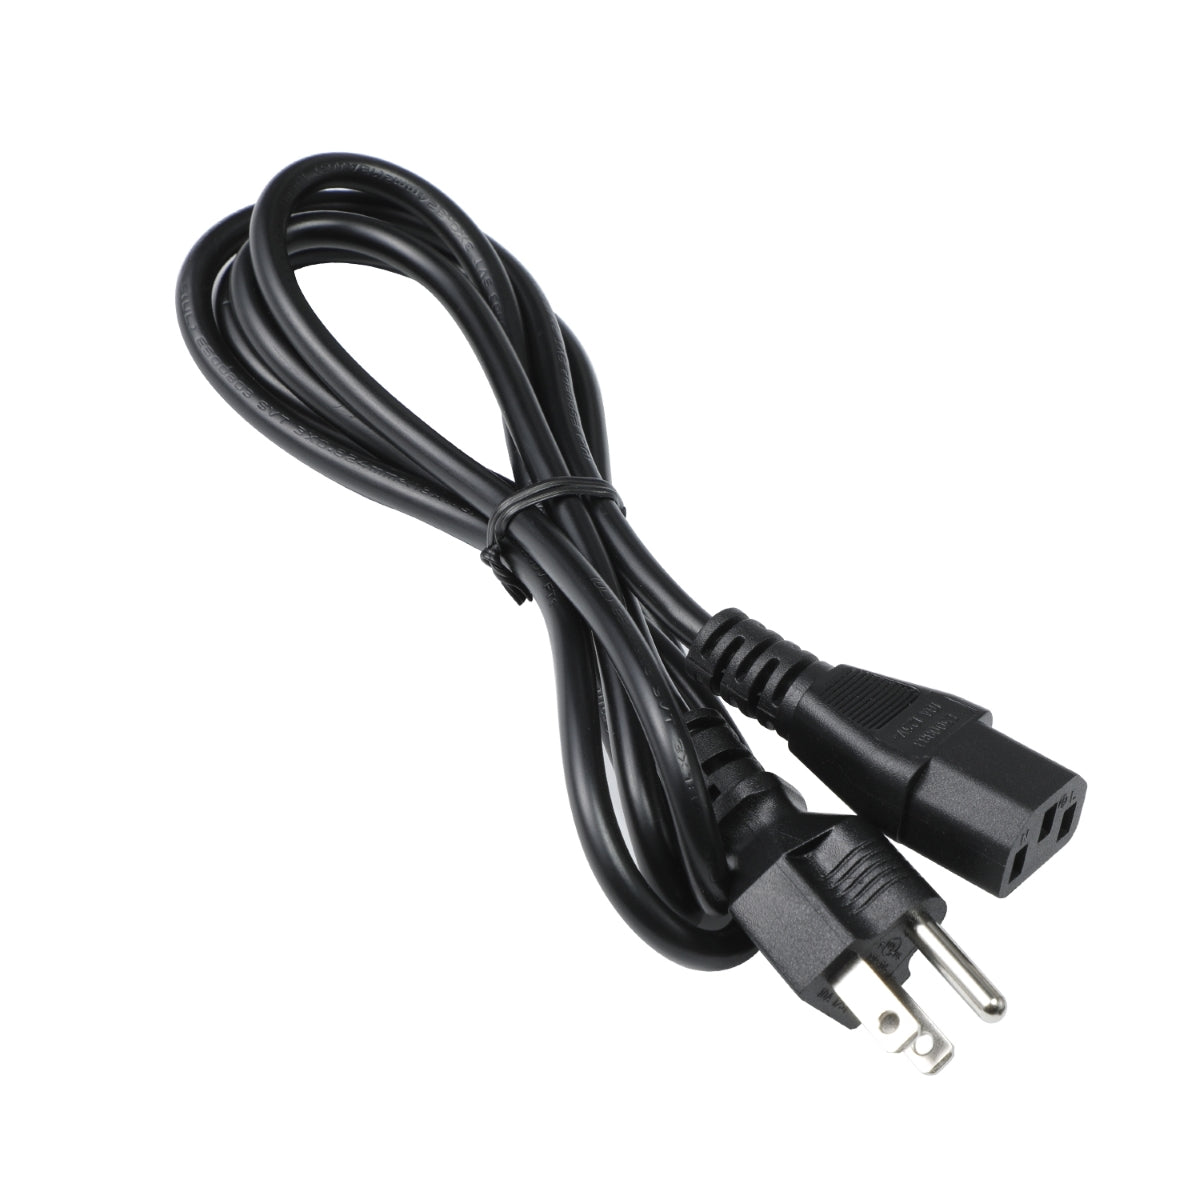 Power Cord for HP Pavilion 550-153w Computer.